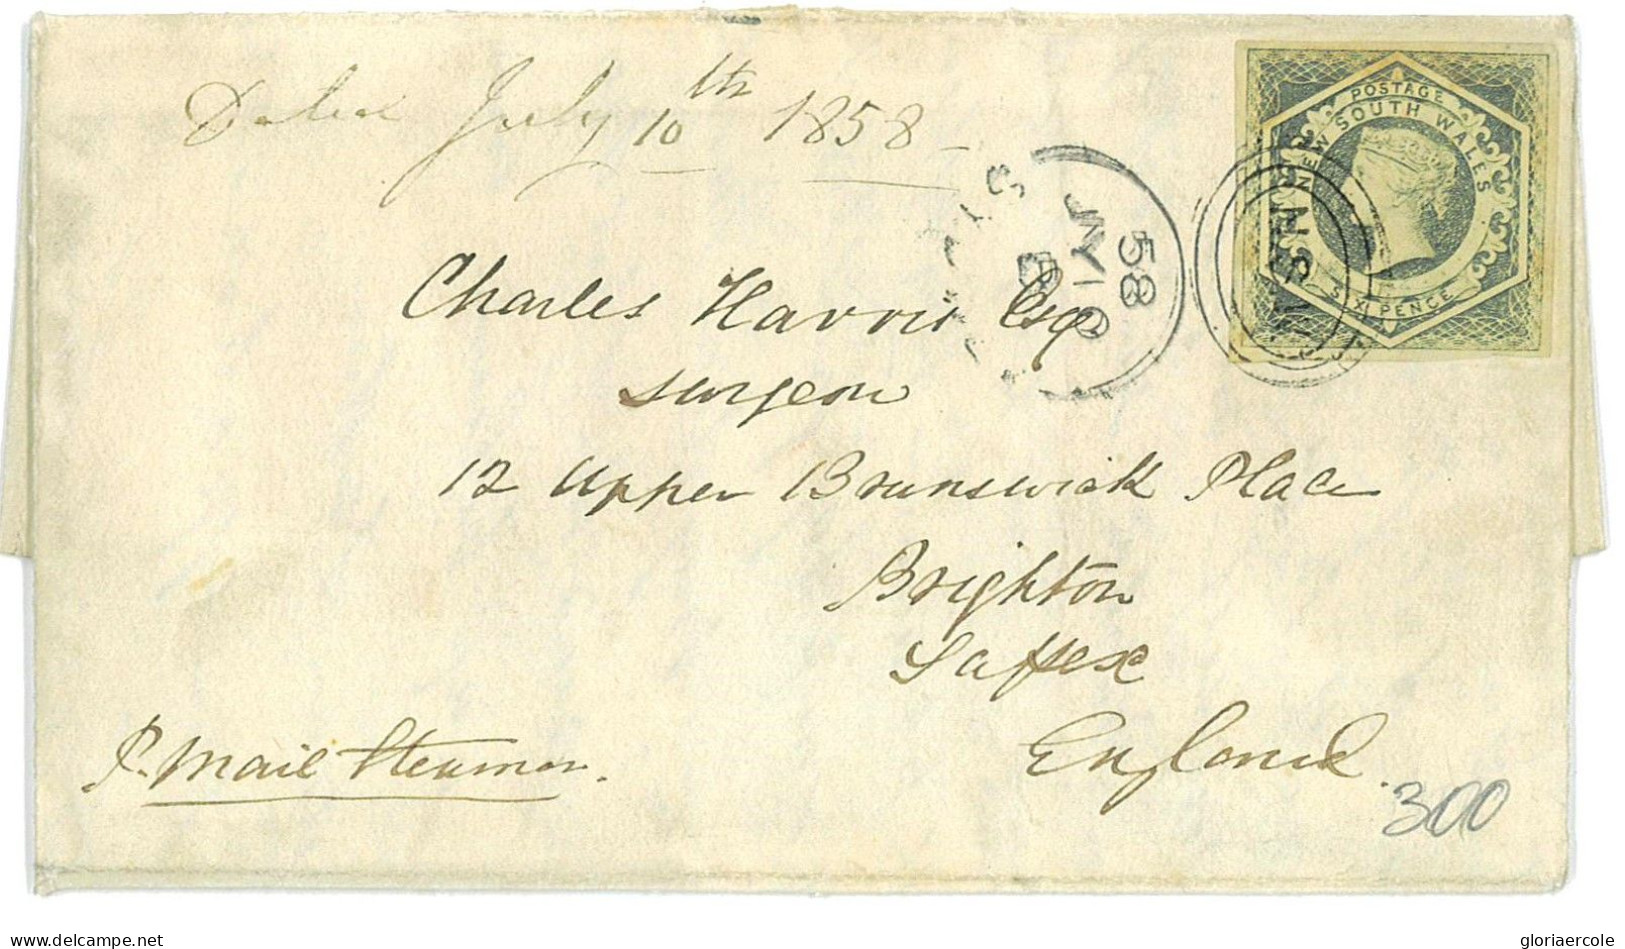 P2850 - NEW SOUTH WALES SG. 91 ON FOLDED LETTER FROM SIDNEY TO BRIGHTON 1858 - Covers & Documents